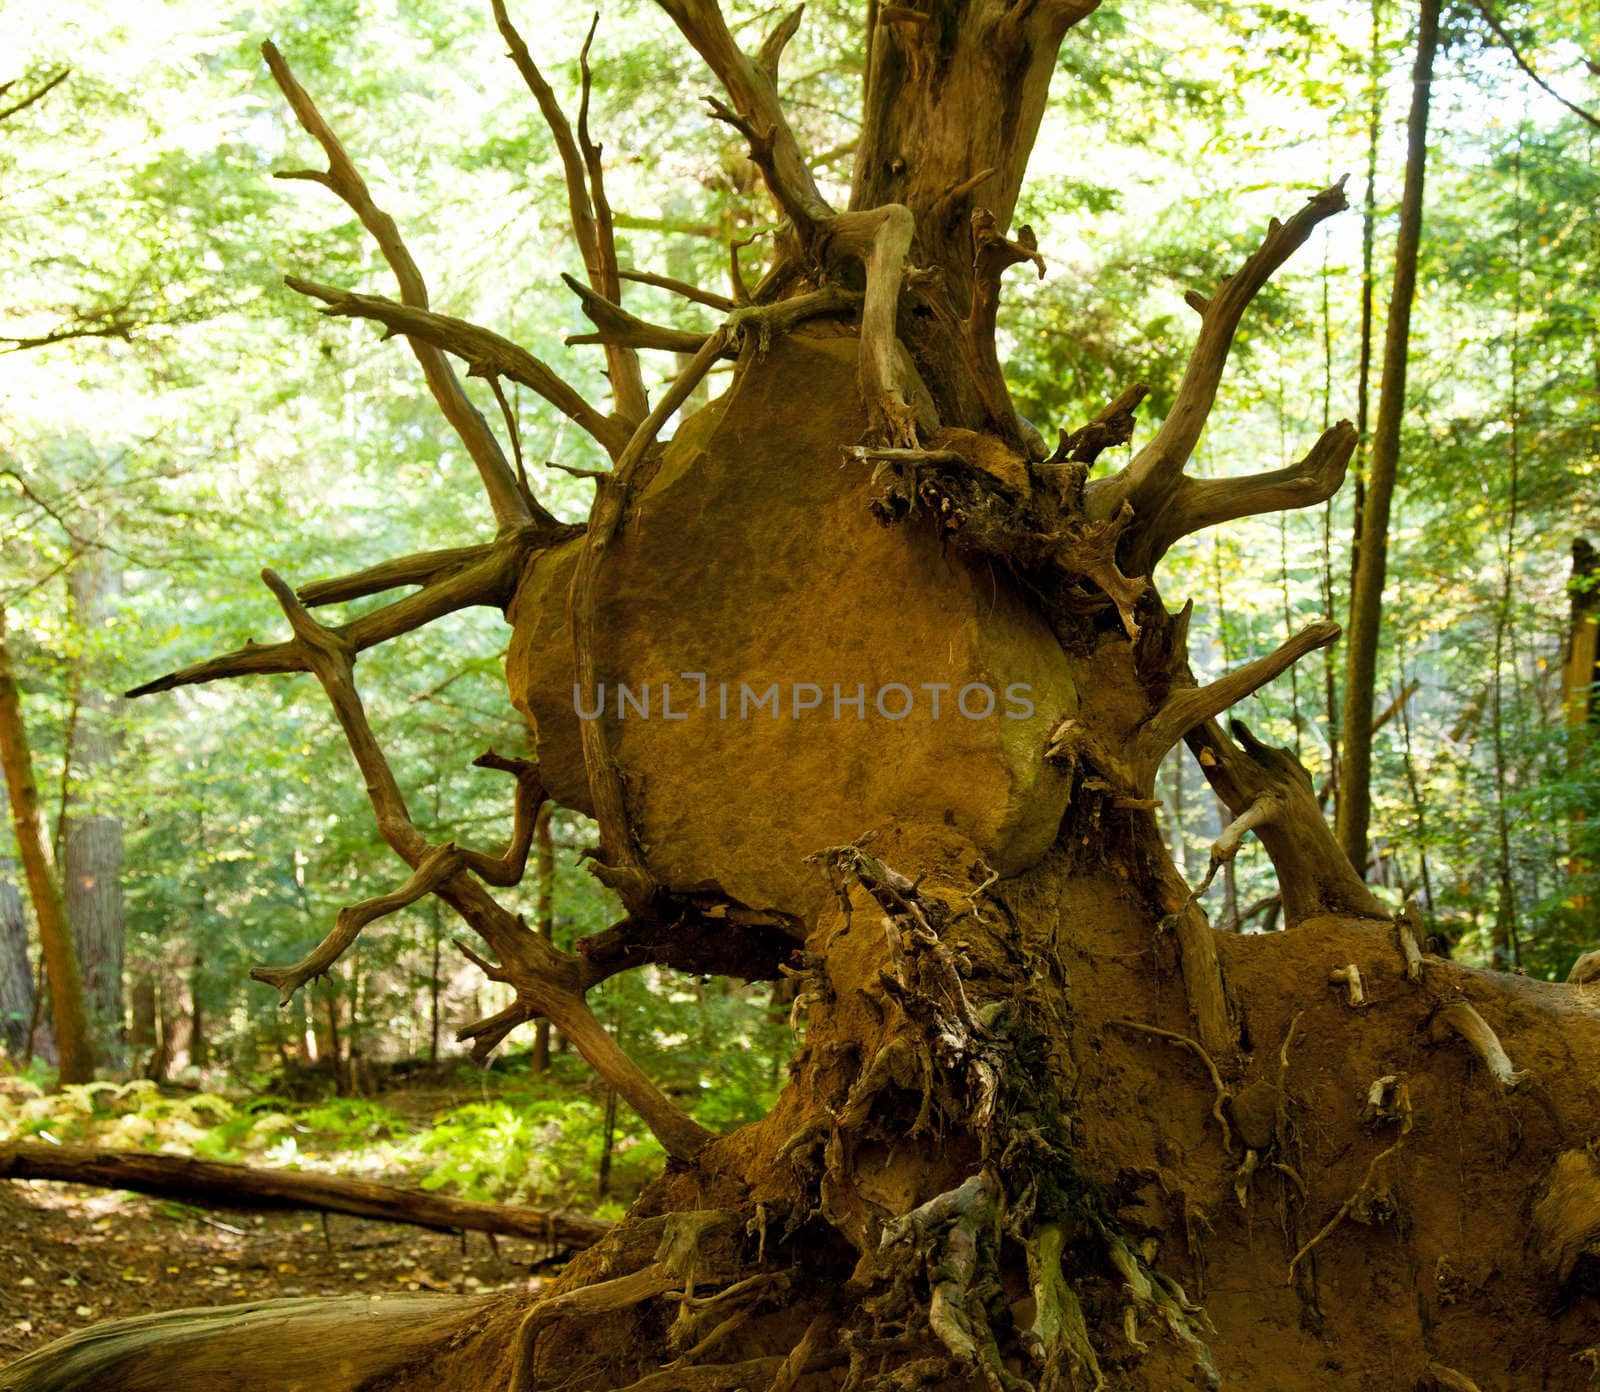 Large rock trapped in uprooted roots of large tree felled by a storm